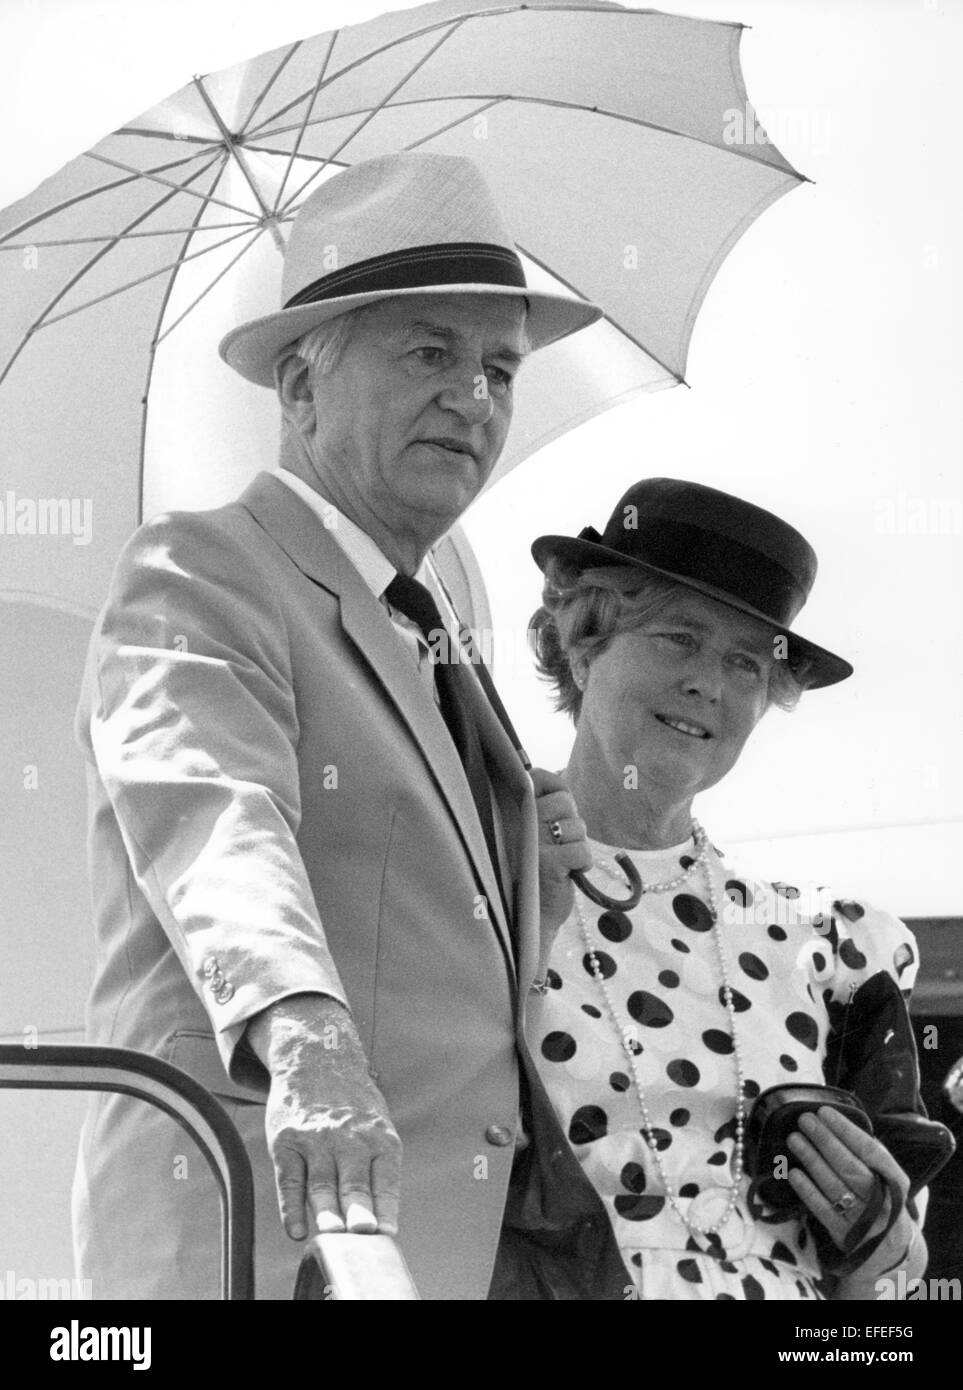 FILE - A file picture dated 02 March 1988 shows the later former German President Richard von Weizsaecker and his wife Marianne before their departure from Bamako, Mali. Von Weizsaecker died on 30 January 2015 at the age of 94. Photo: MARTIN ATHENSTAEDT/dpa (only b/w) Stock Photo